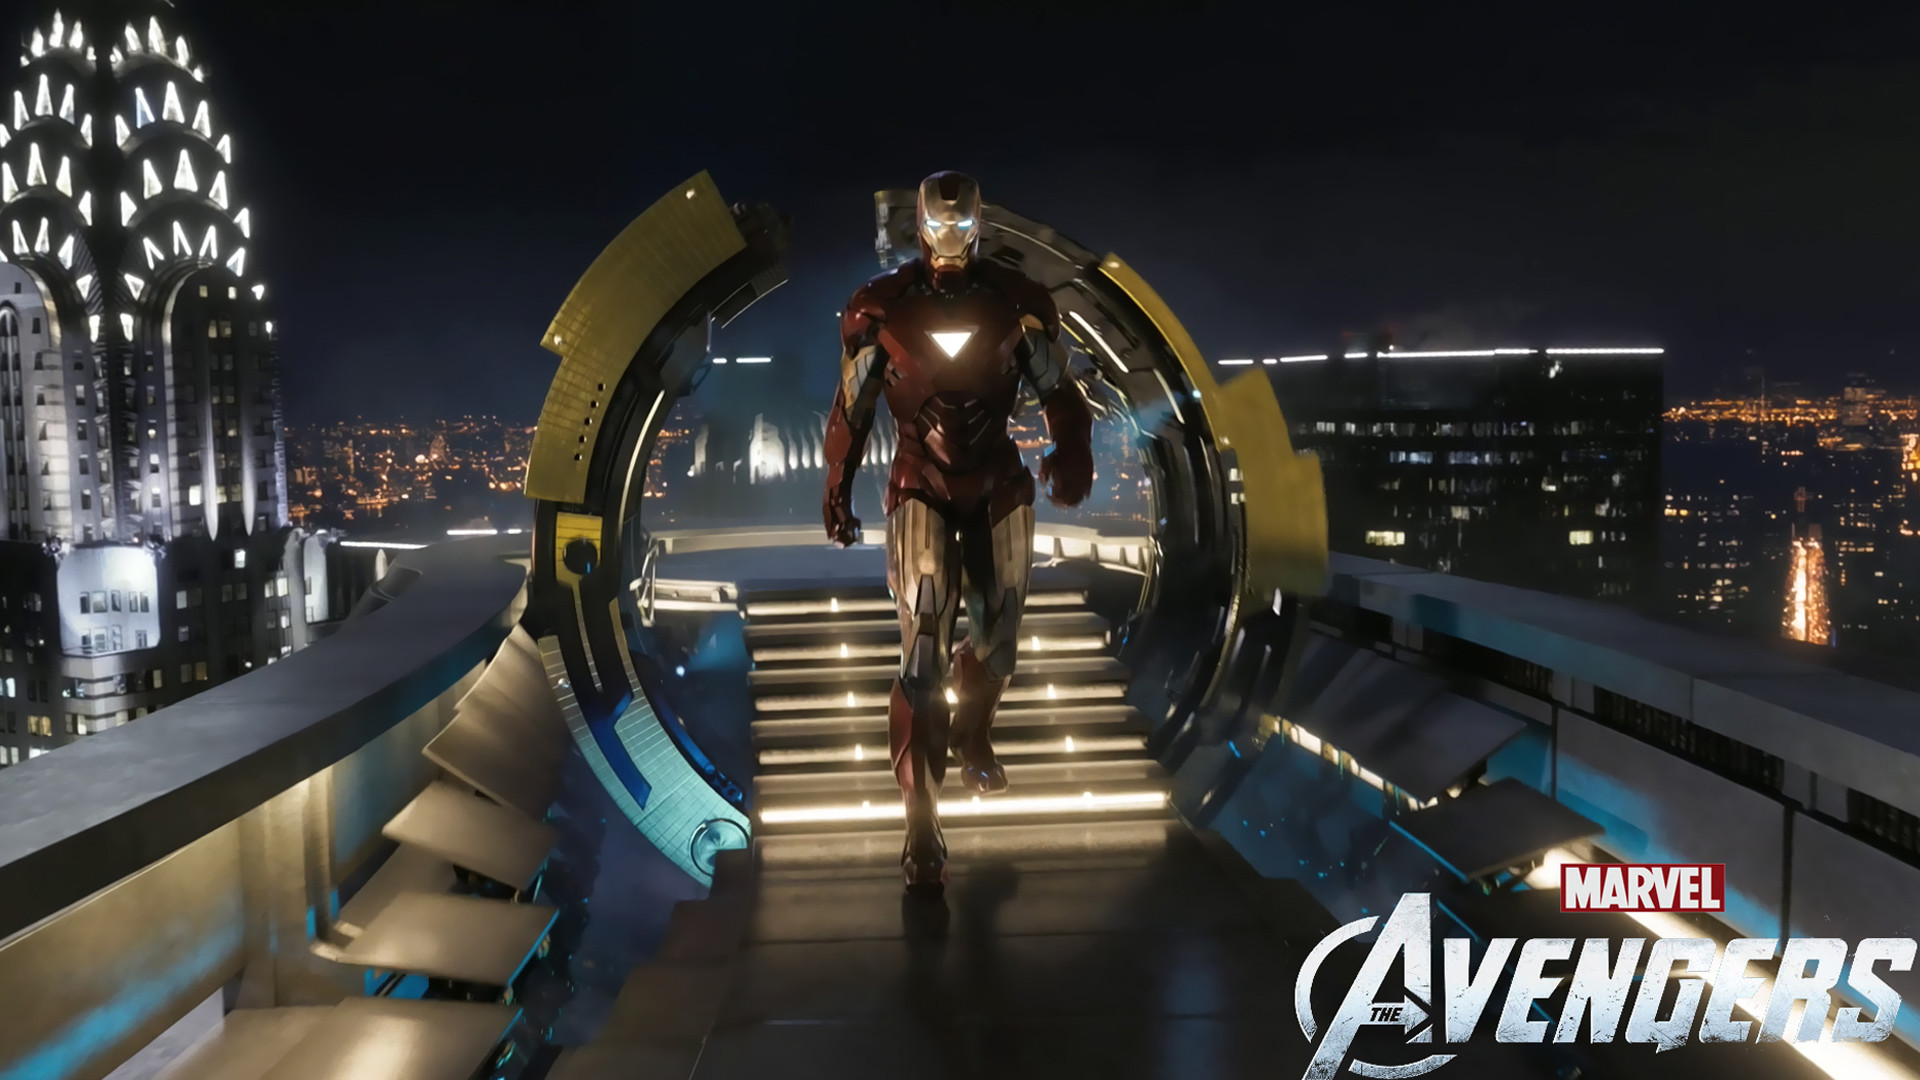 1920x1080 Print Avengers Iron Man 3 Coloring Pages or Download Avengers Iron .